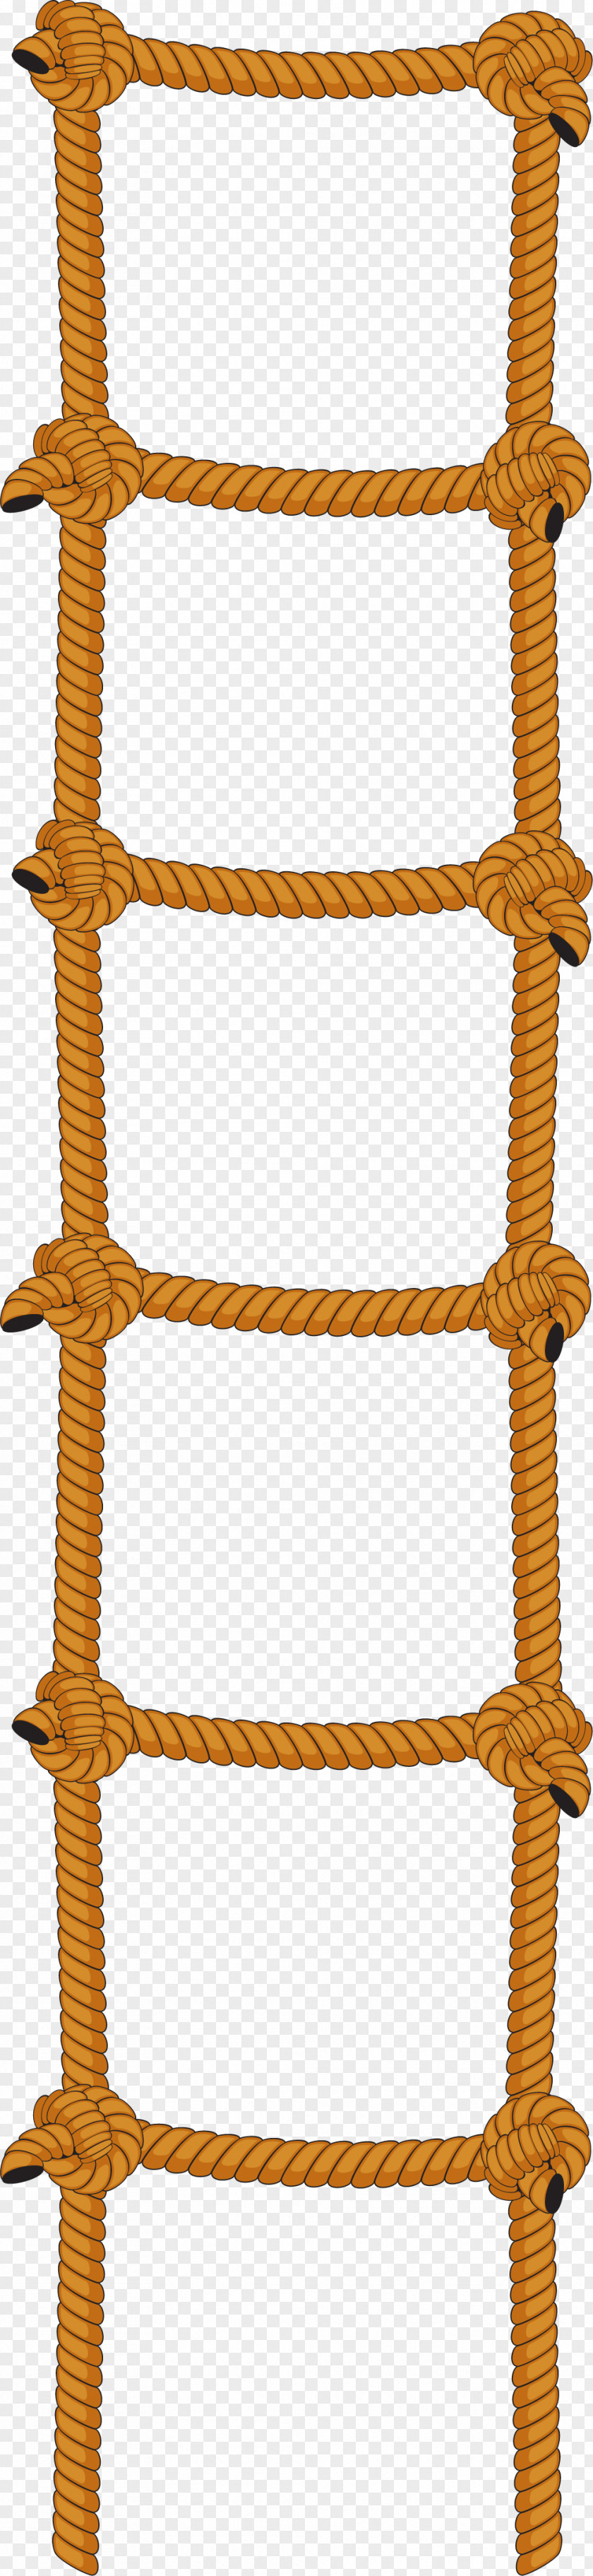 Knotted Ladder Stairs PNG